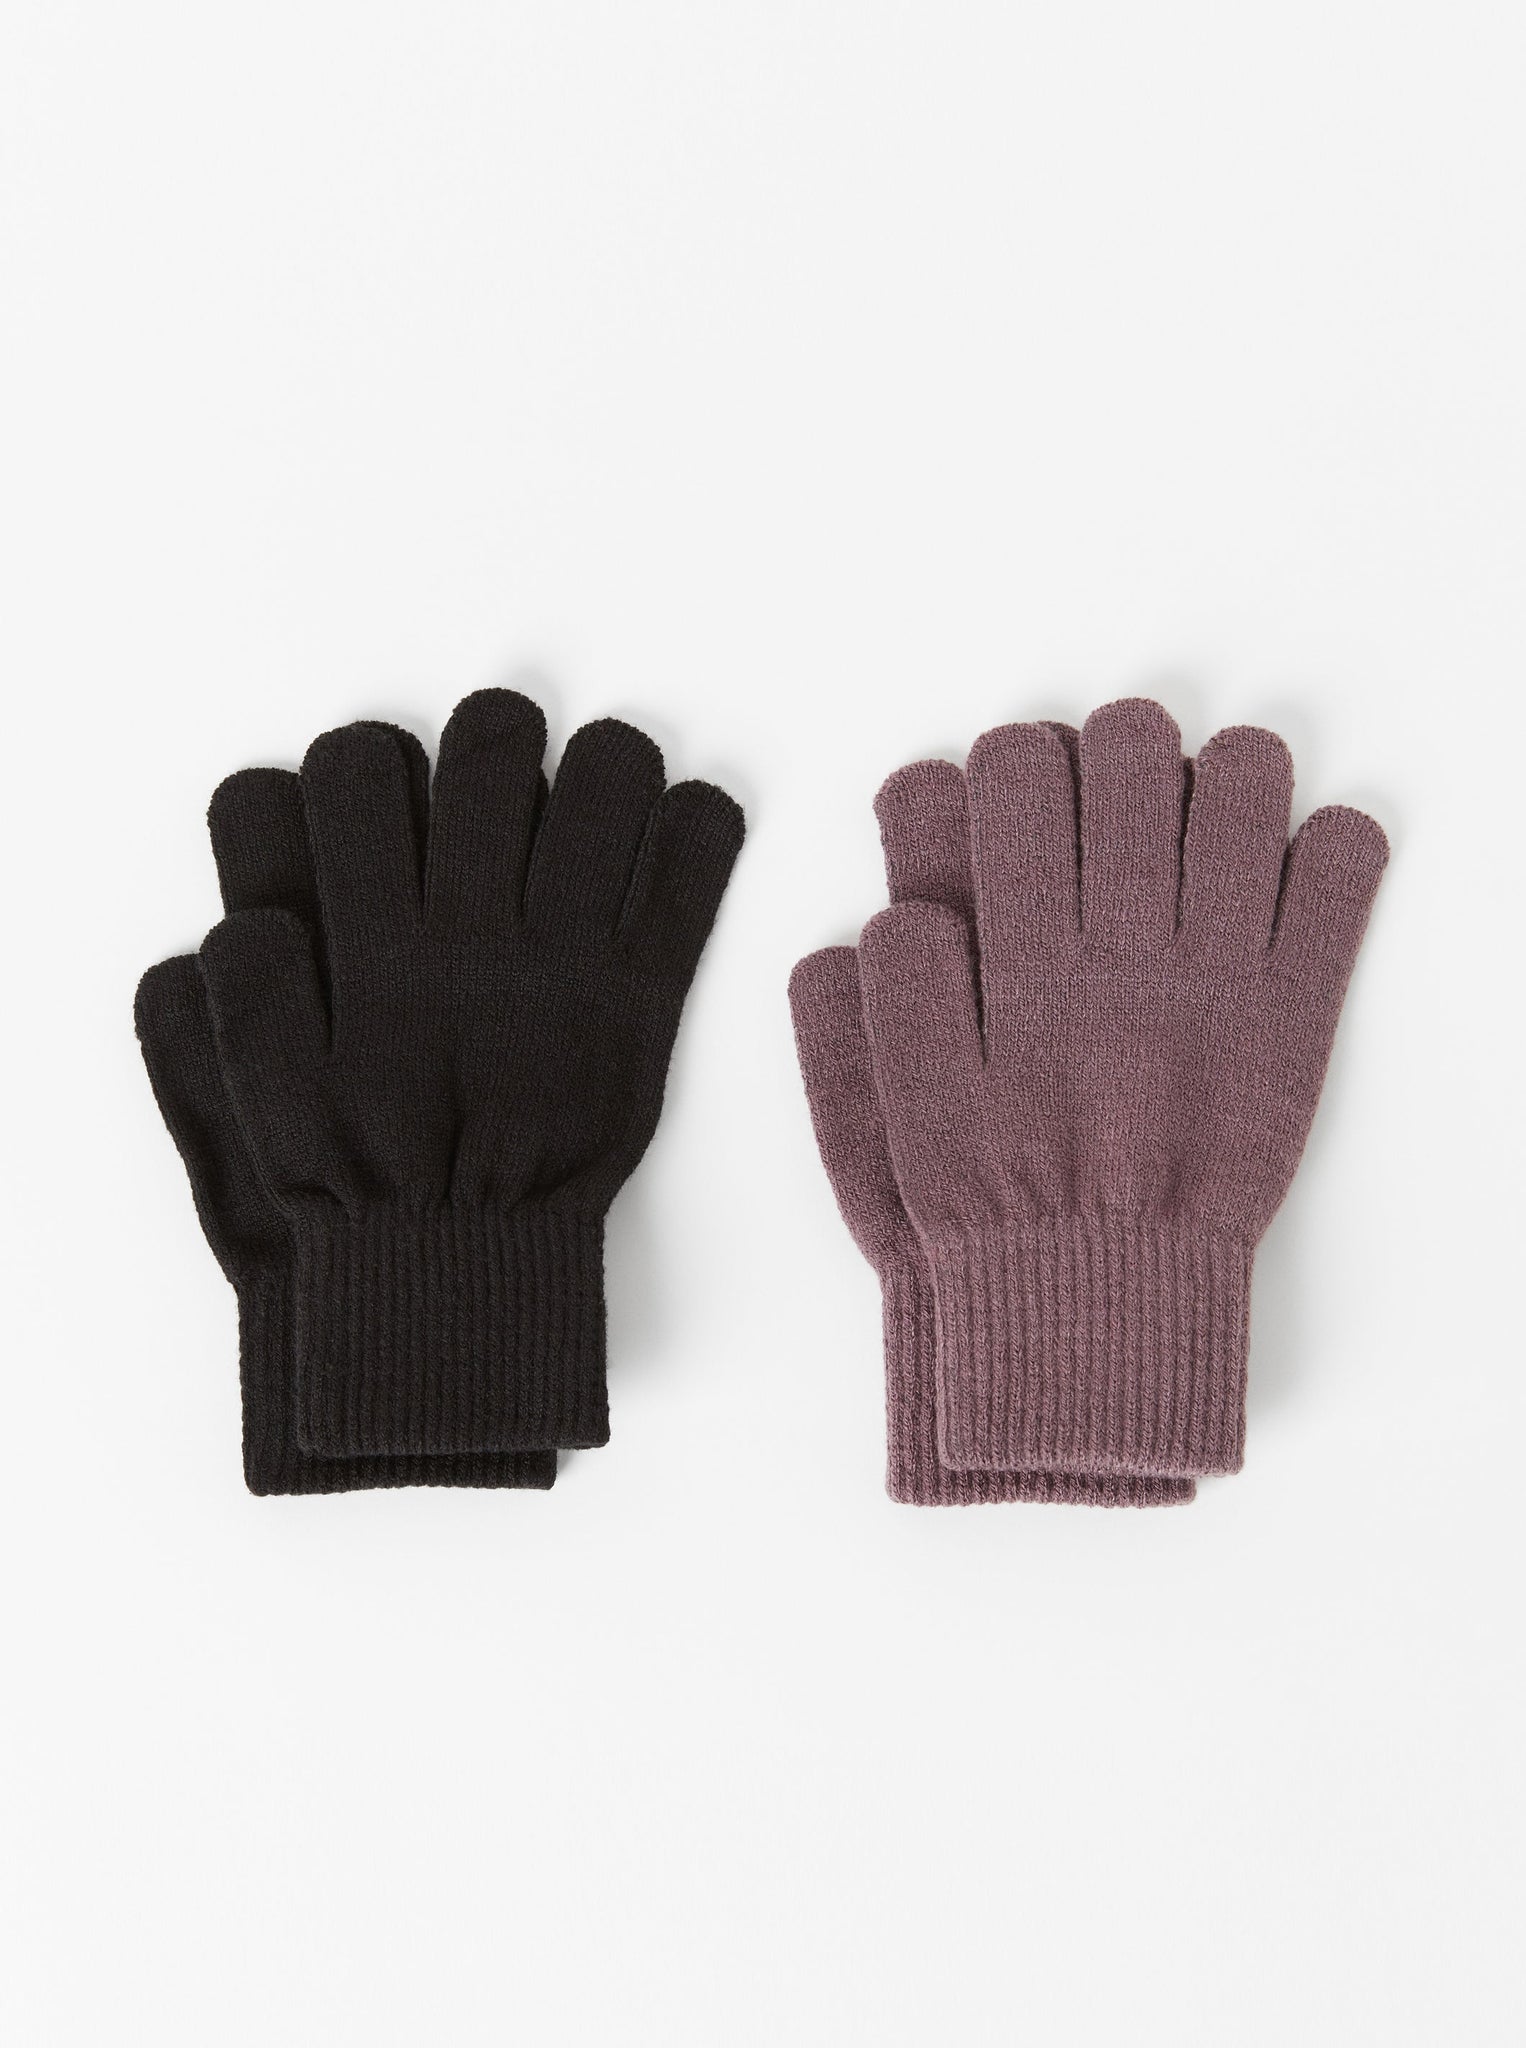 Purple Magic Kids Gloves Multipack from the Polarn O. Pyret kidswear collection. Sustainably produced kids outerwear.